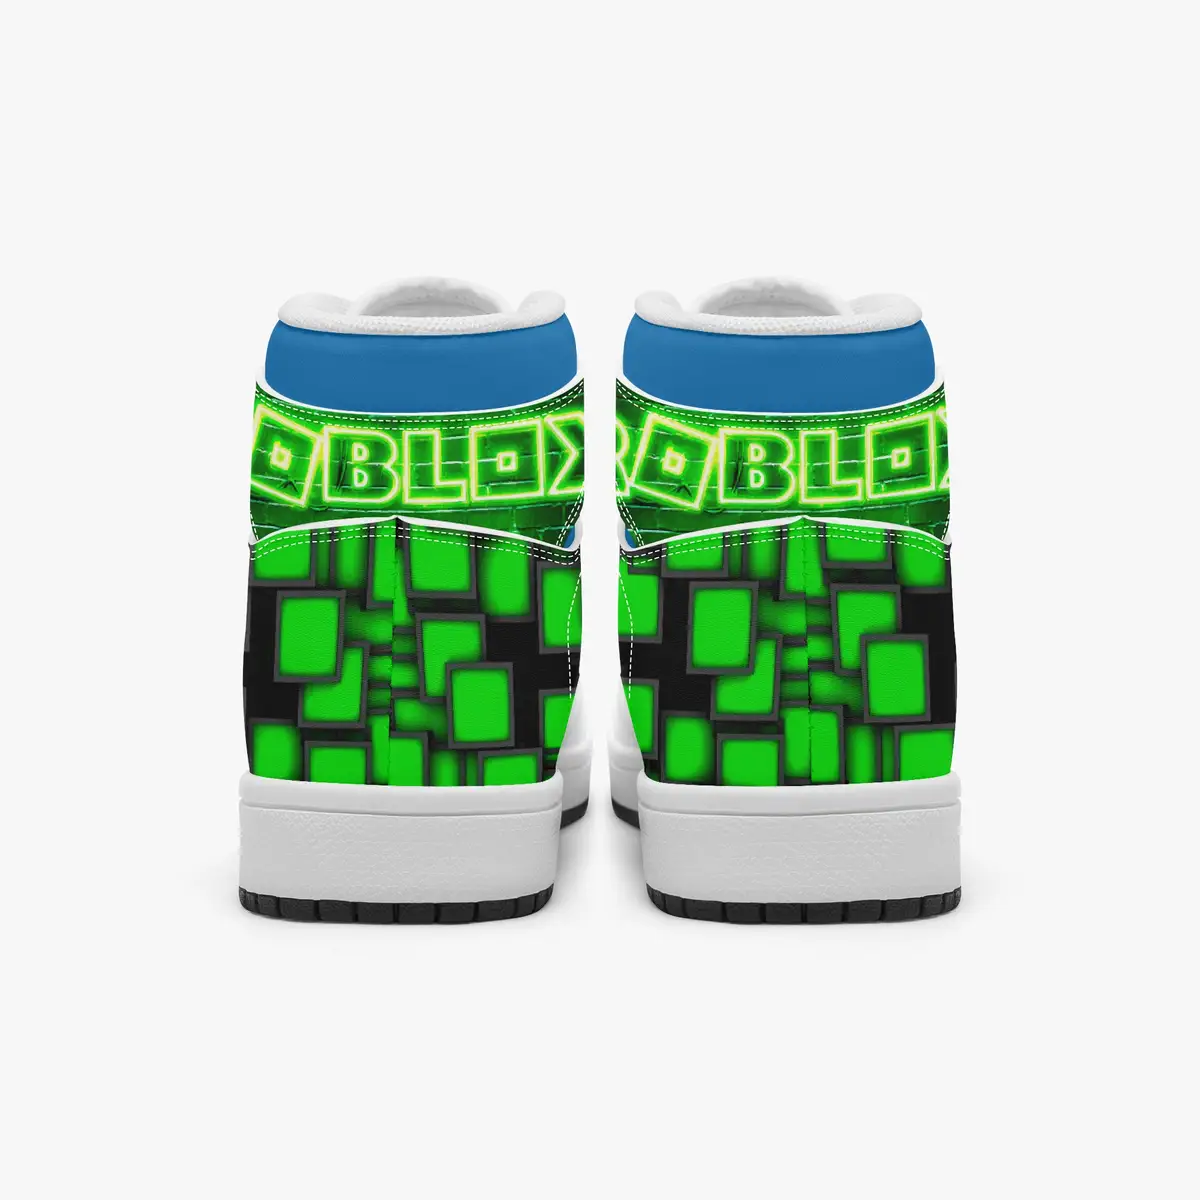 Kids ROBLOX Characters High-Top Shoes Leather Green and Blue, Jordans Style Sneakers Cool Kiddo 16